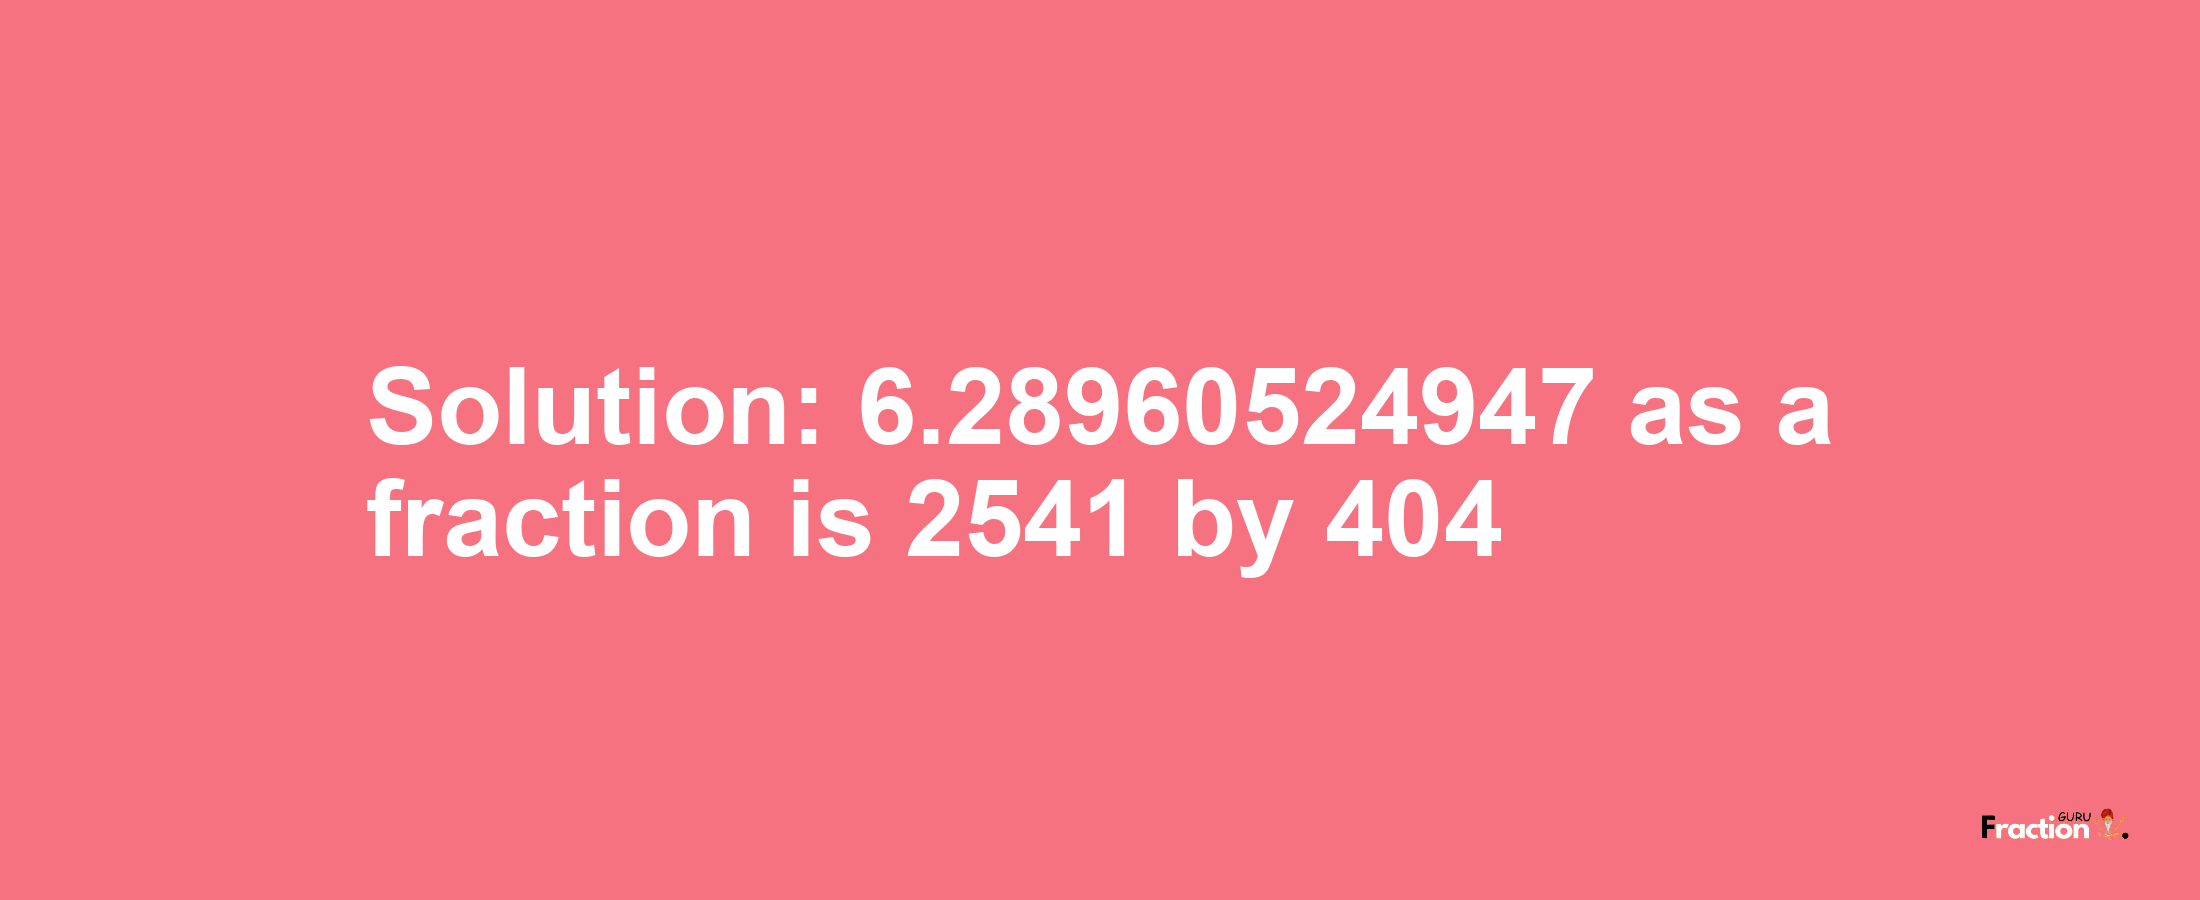 Solution:6.28960524947 as a fraction is 2541/404